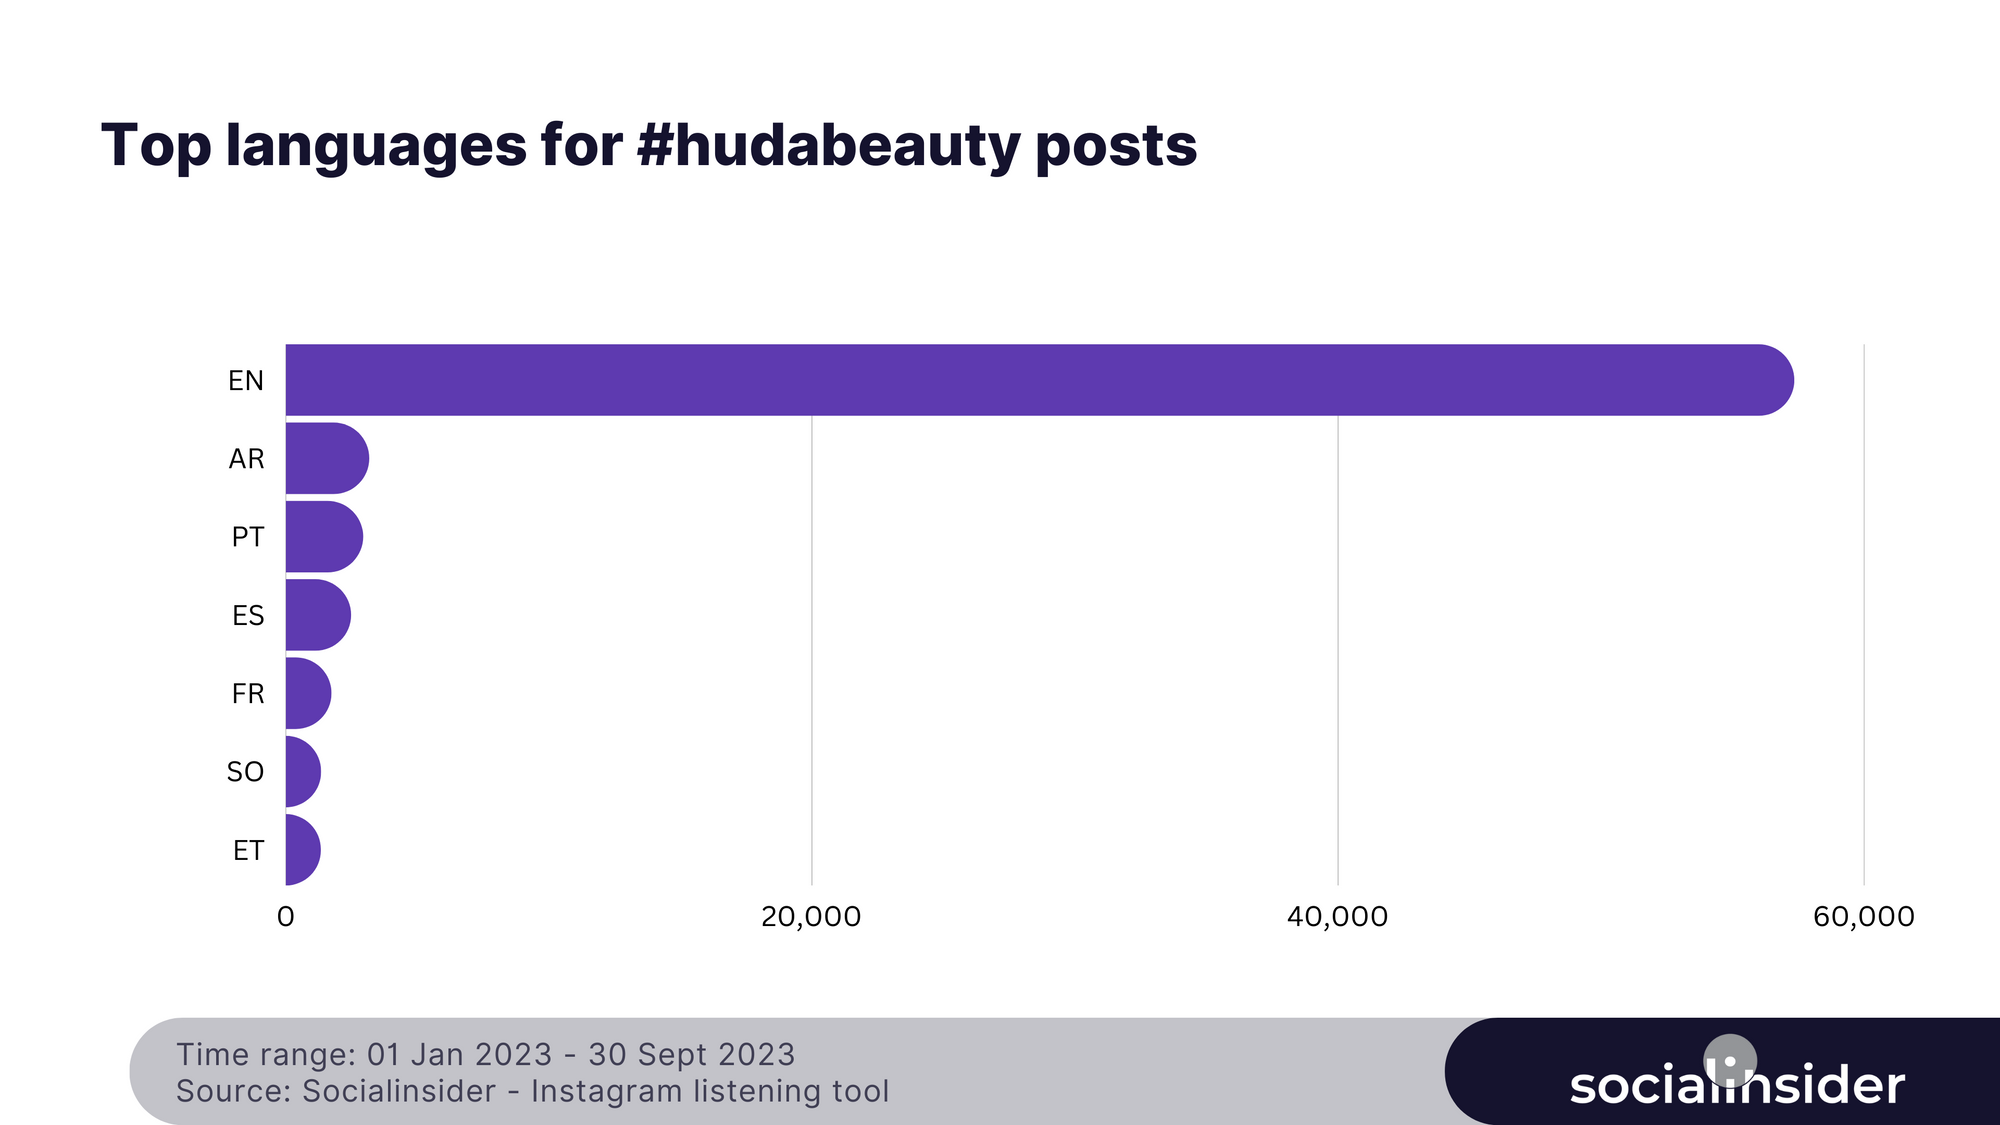 demographics data and insights for #hudabeauty